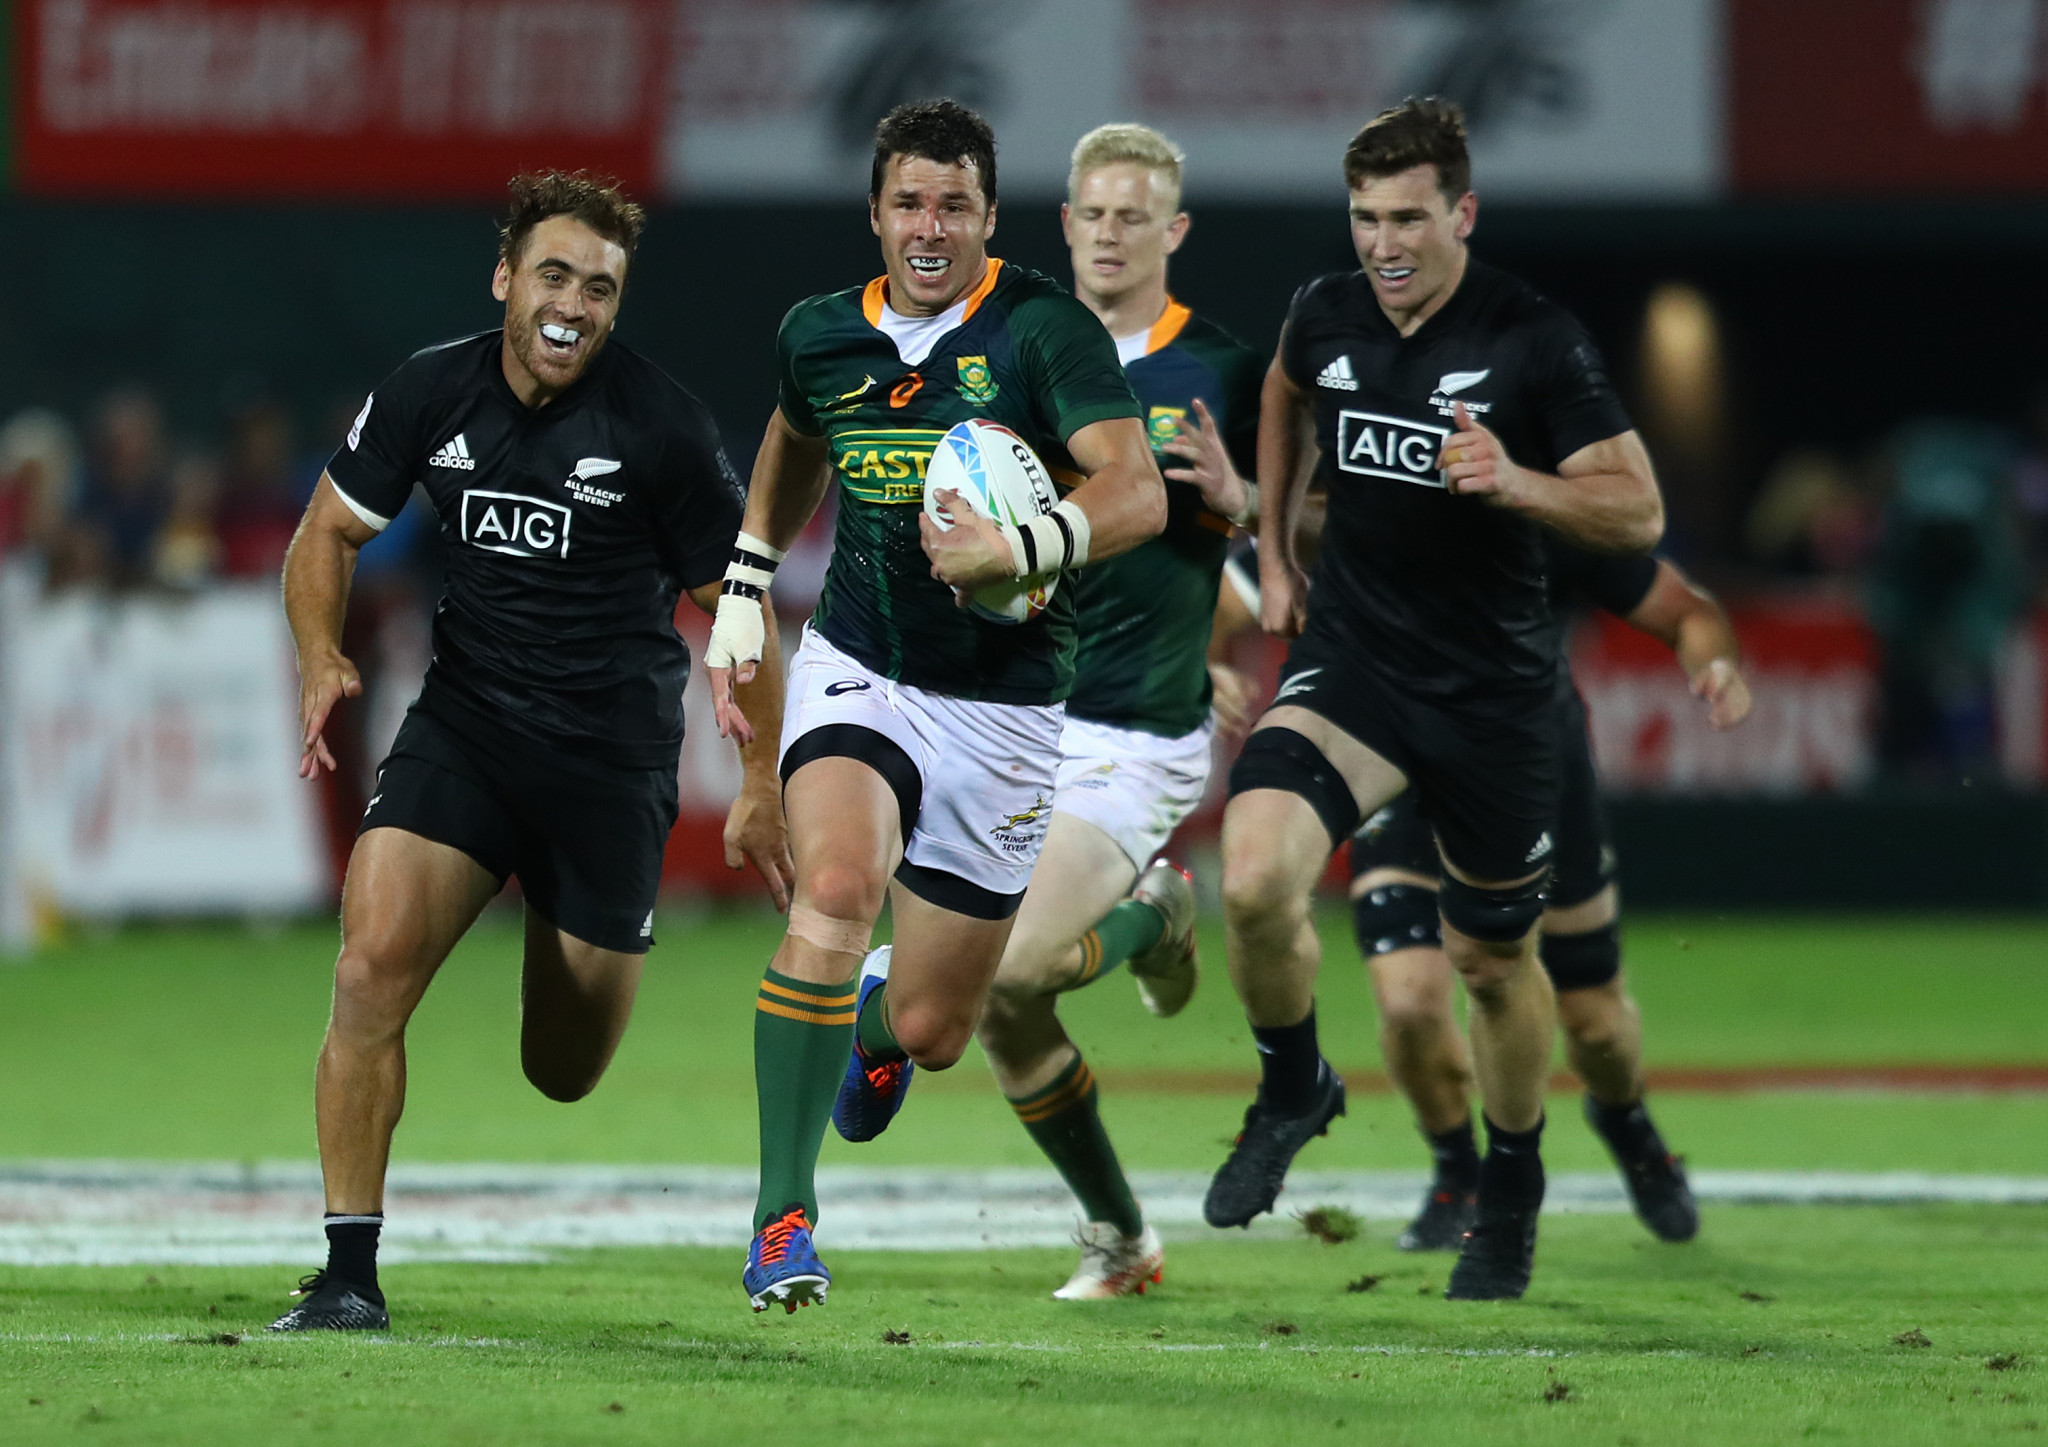 South Africa blitz New Zealand to win Dubai World Rugby Sevens Series